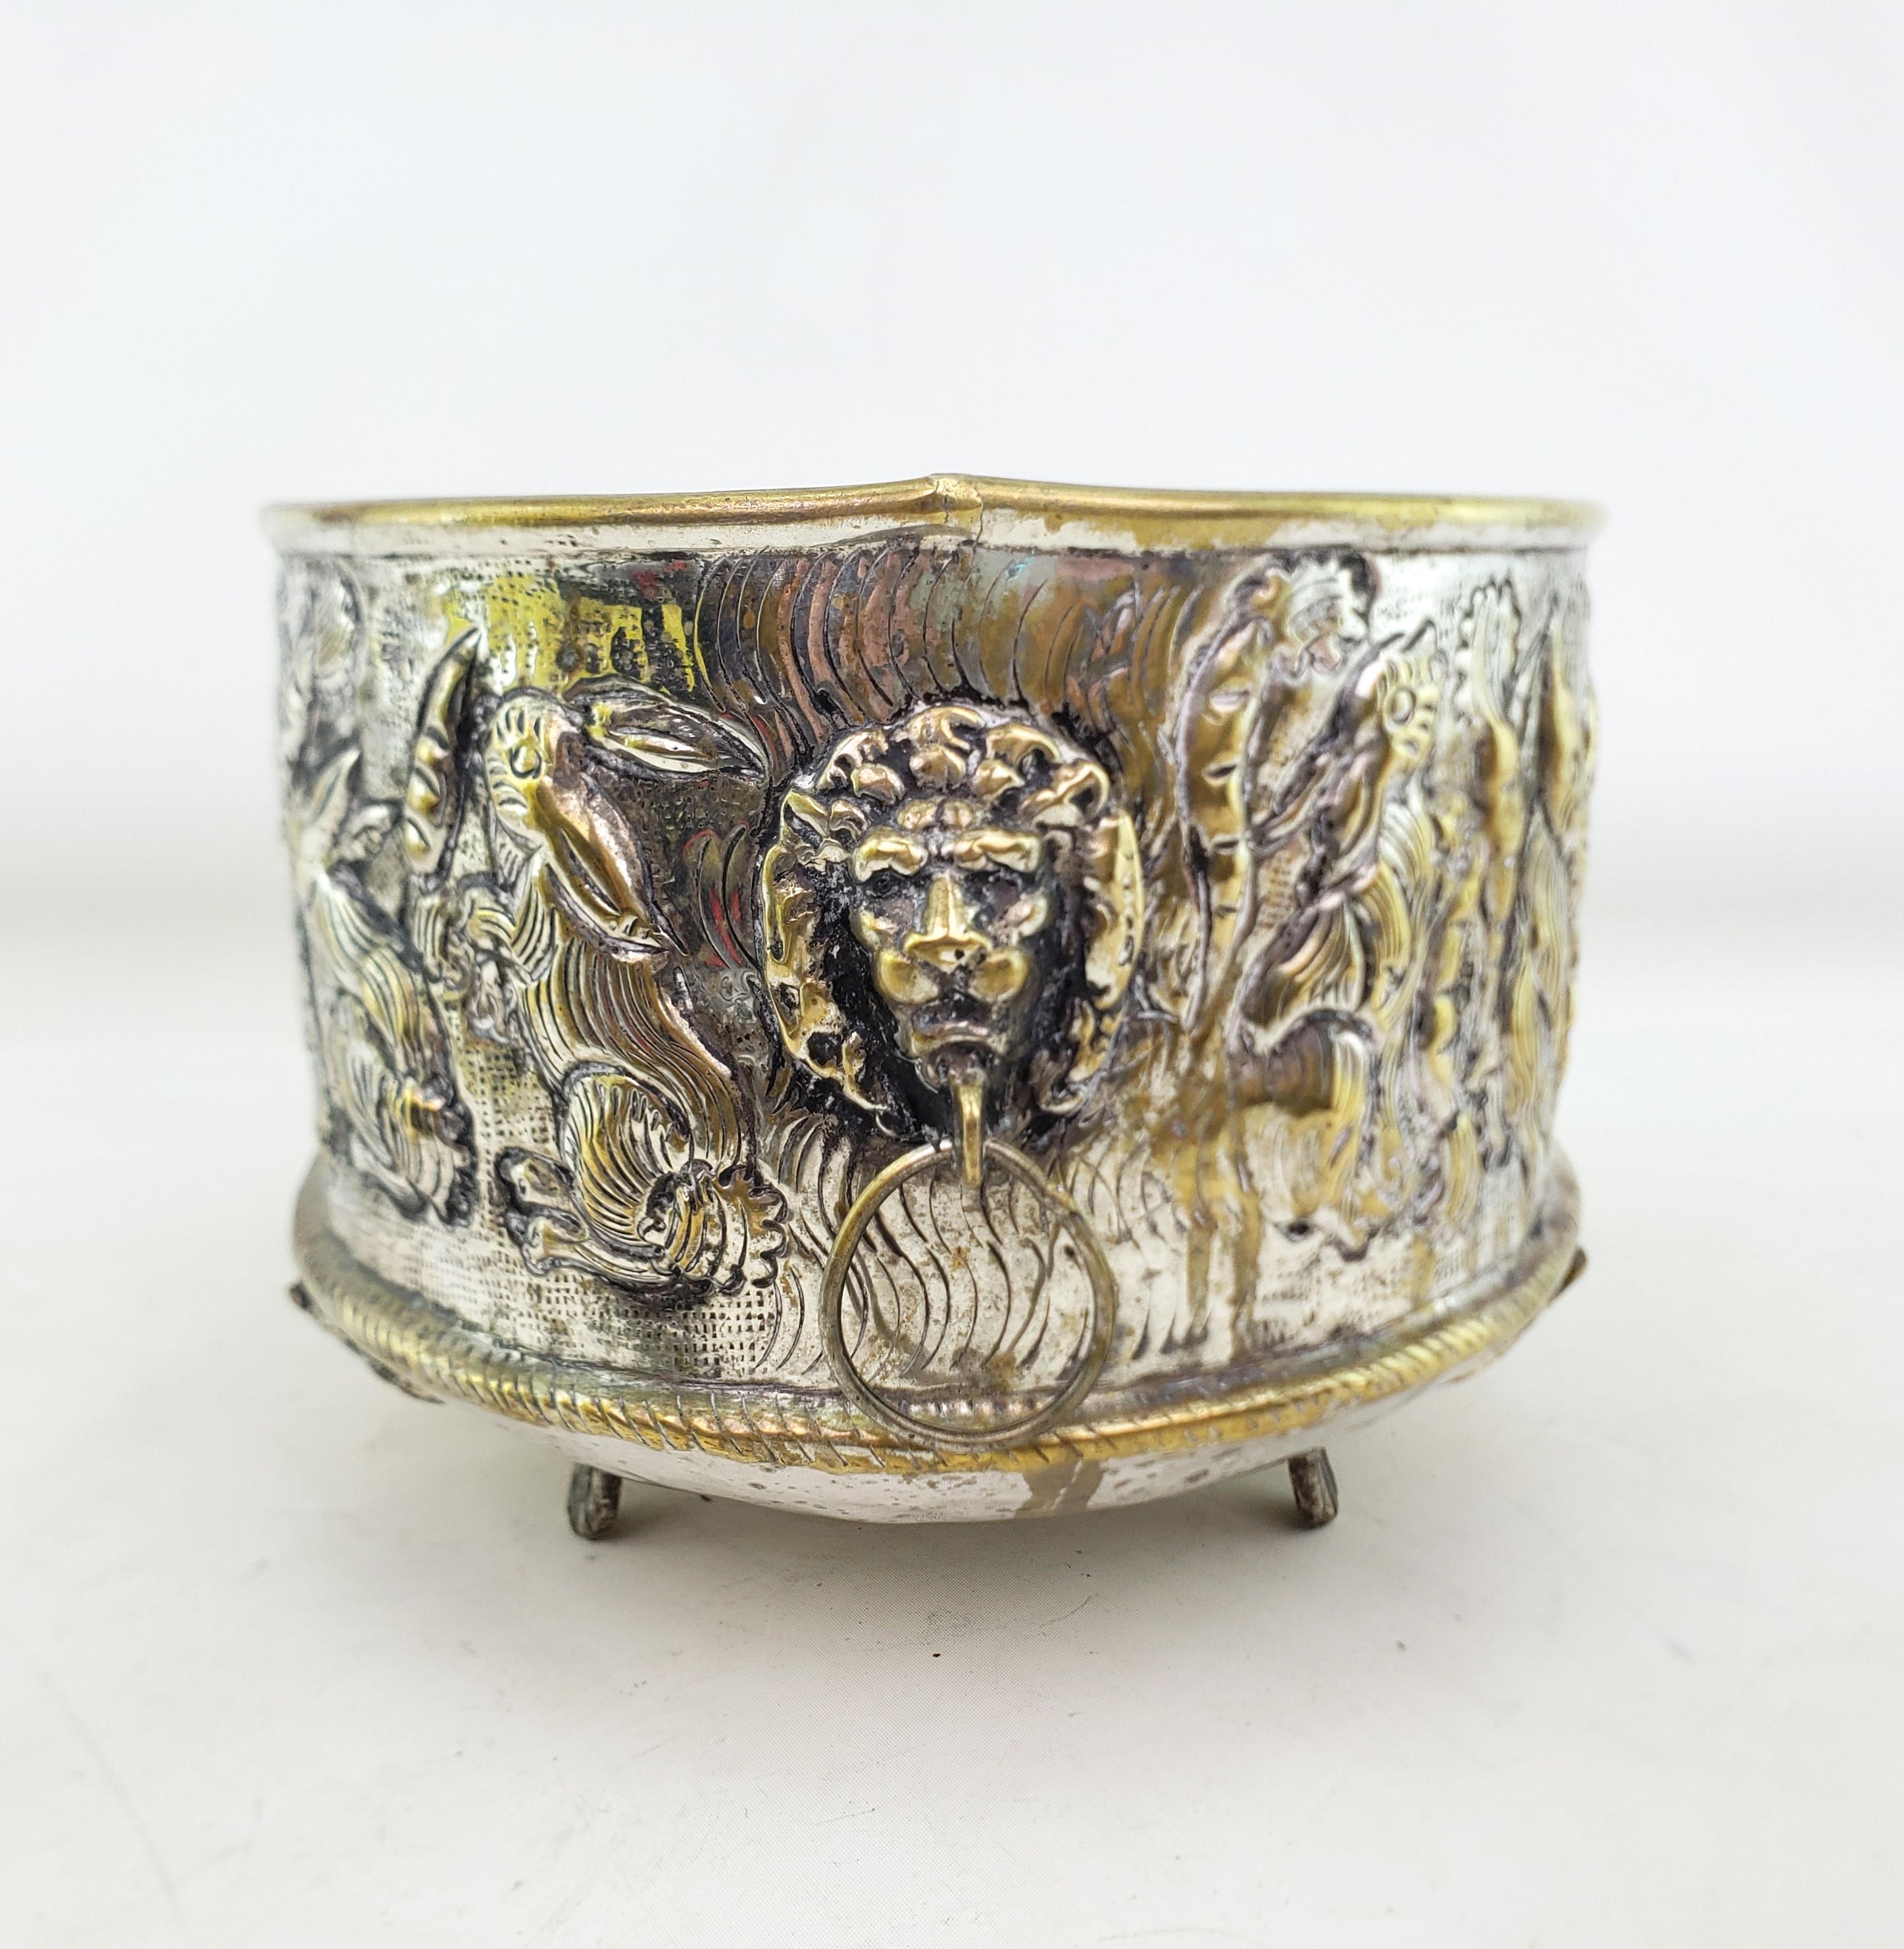 19th Century Antique English Hand-Crafted Plated Brass Planter with Whimsical Rabbits For Sale